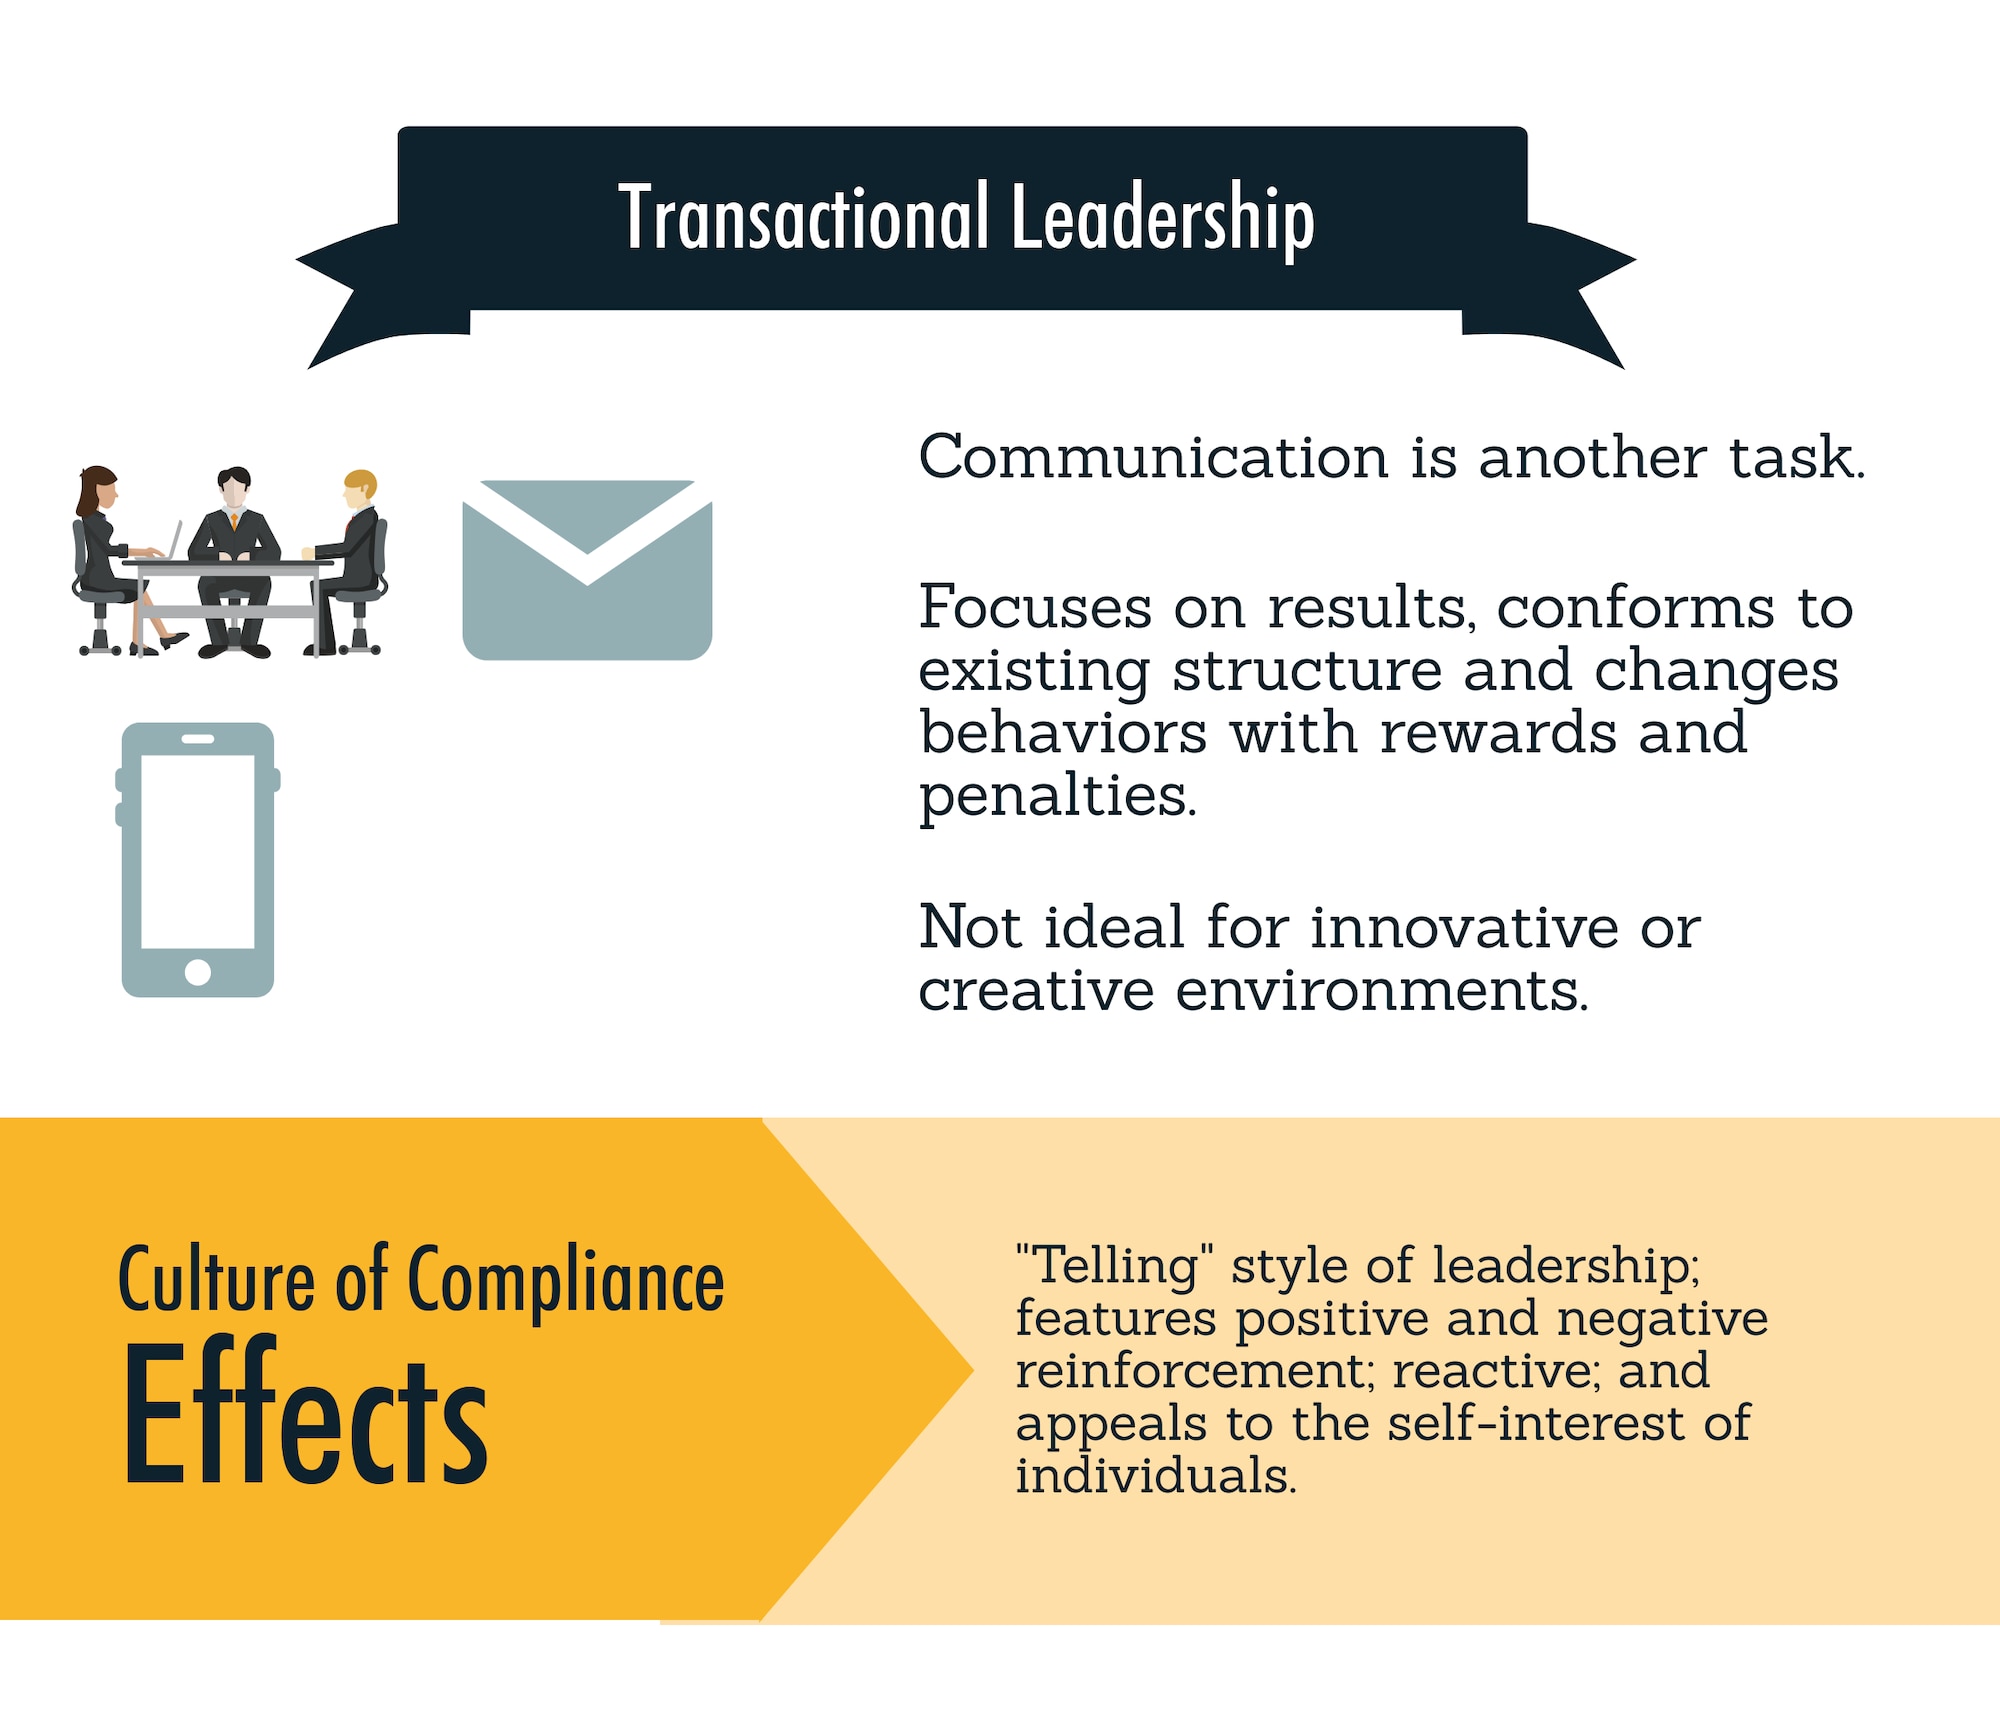 The graphic illustrates using a fire drill to compare transactional leadership to transformational leadership to form a culture of commitment. The purpose is to give advice to managers, supervisors and leaders to lead people effectively not efficiently. (U.S. Air Force graphic by Joseph Coslett)